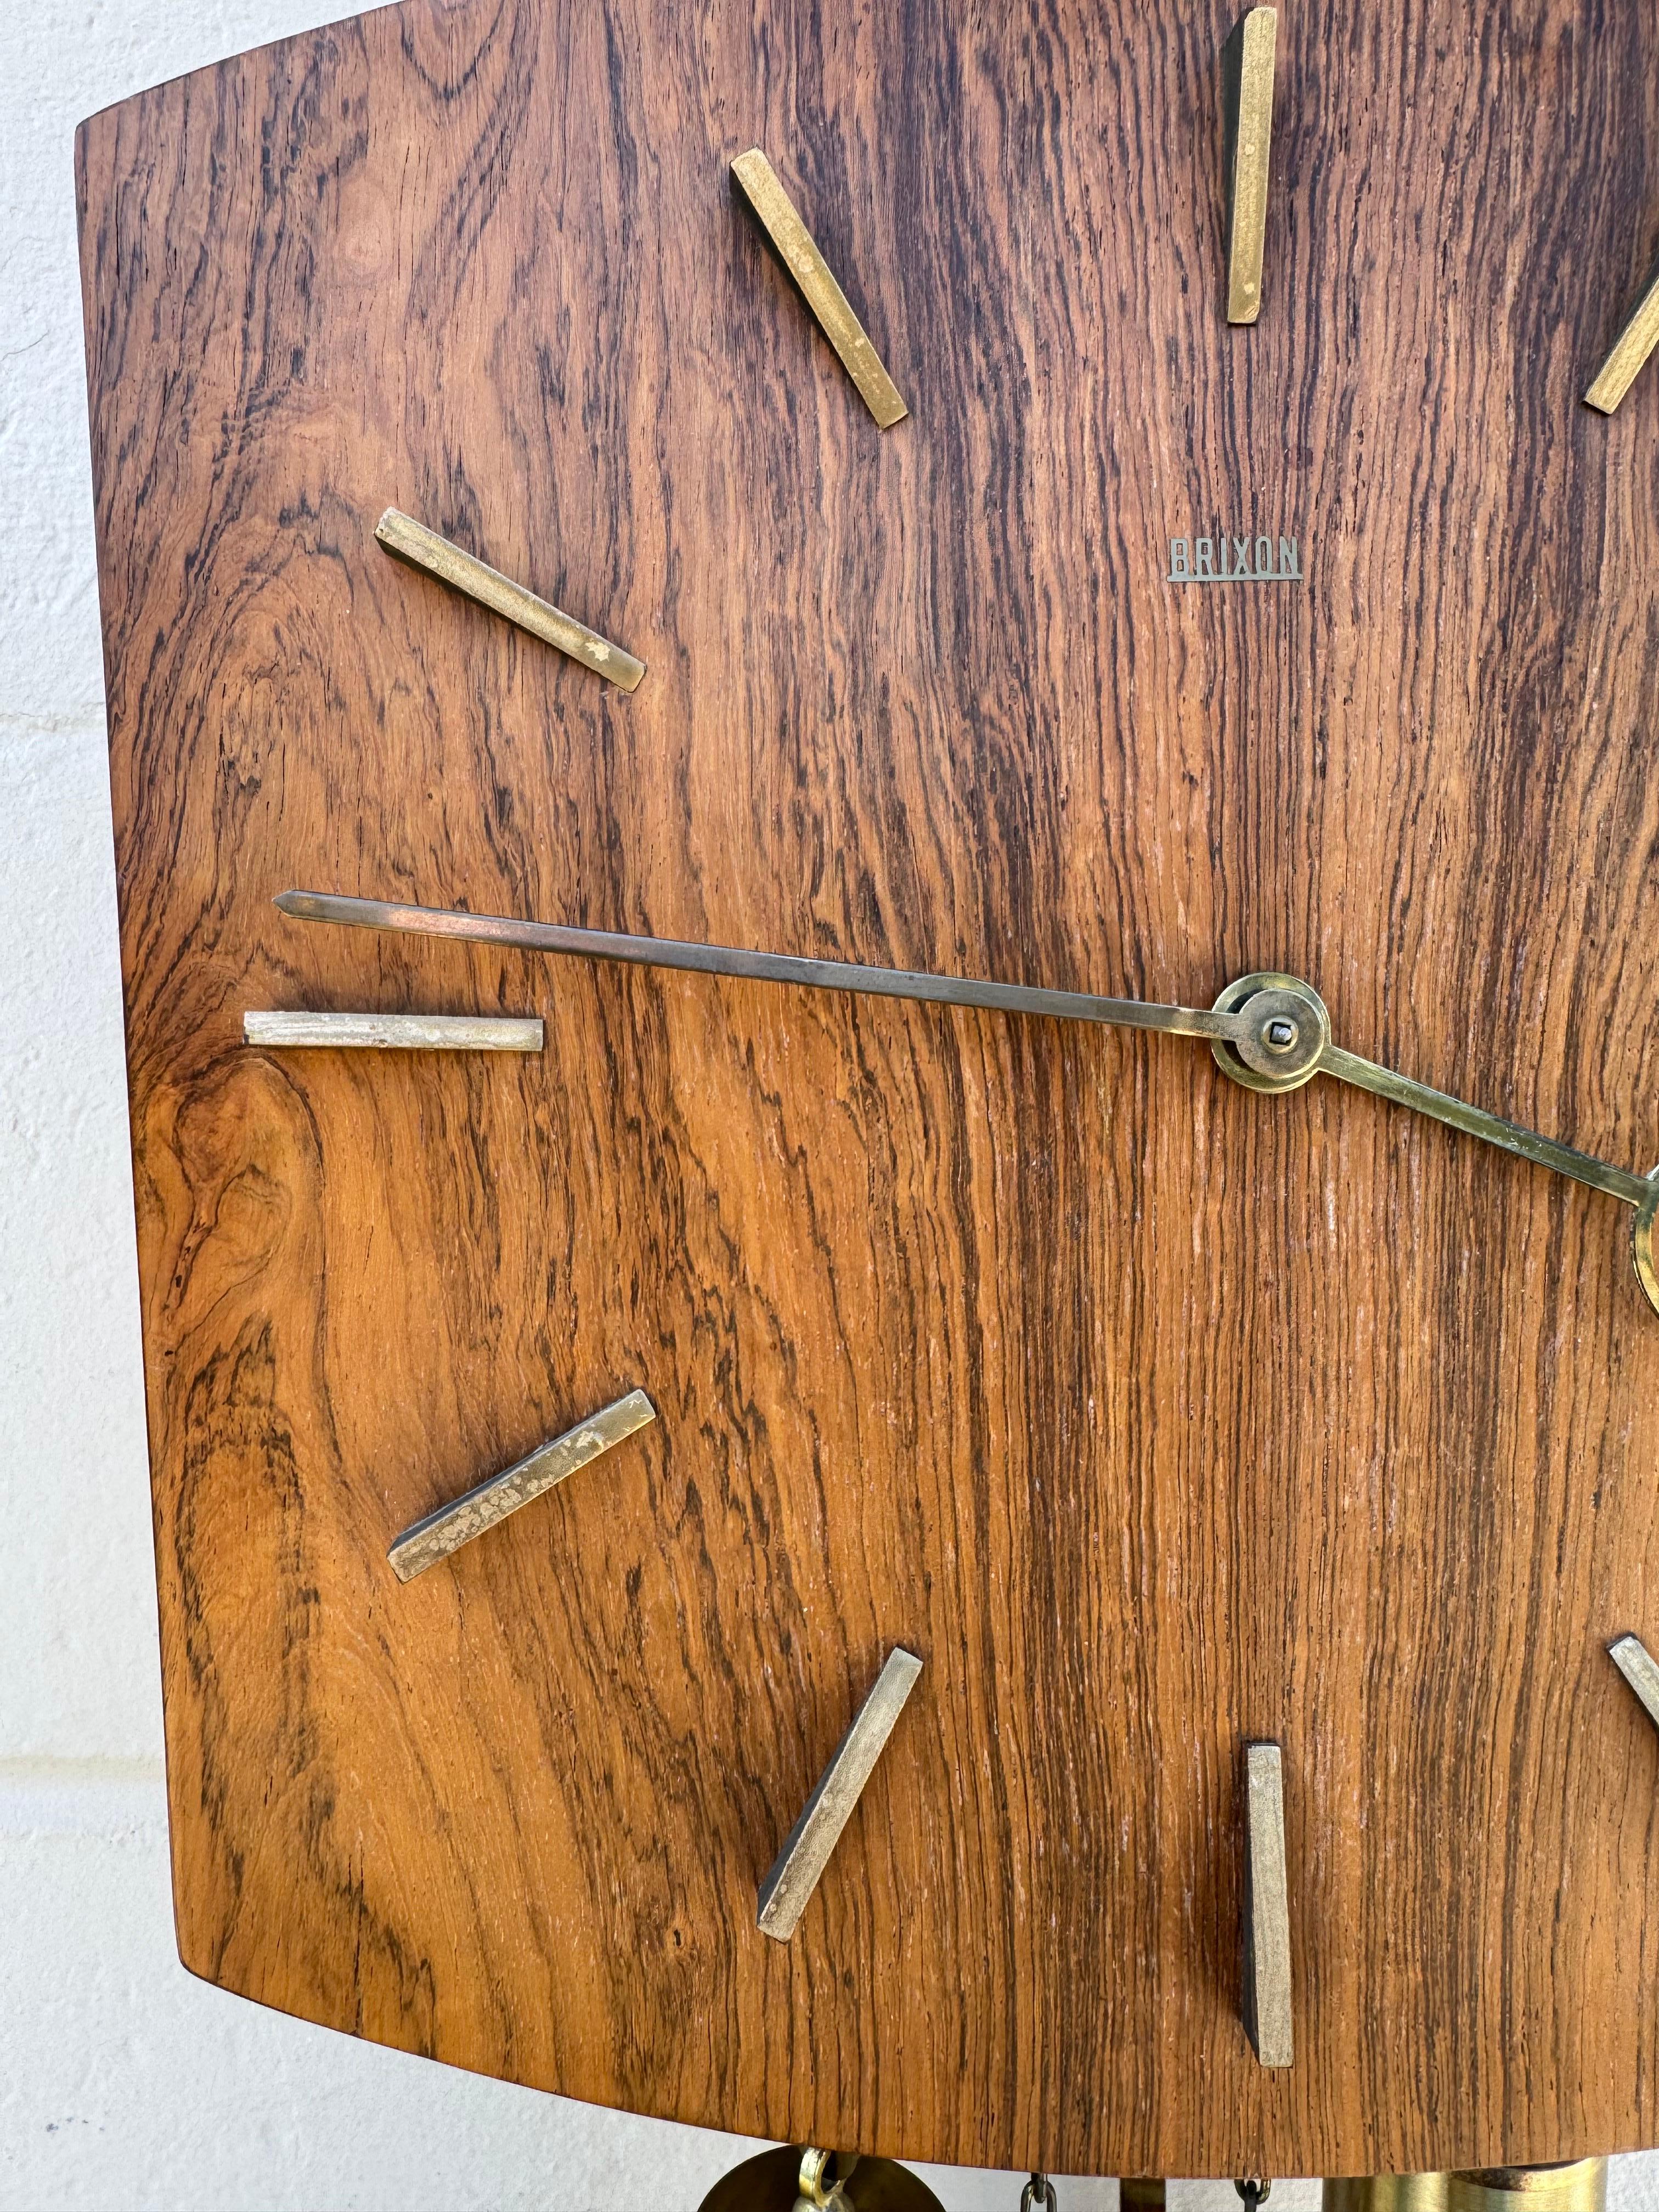 Danish Mid Century Modern Teak And Brass Pendulum Wall Clock By Brixon In Good Condition For Sale In San Carlos, CA